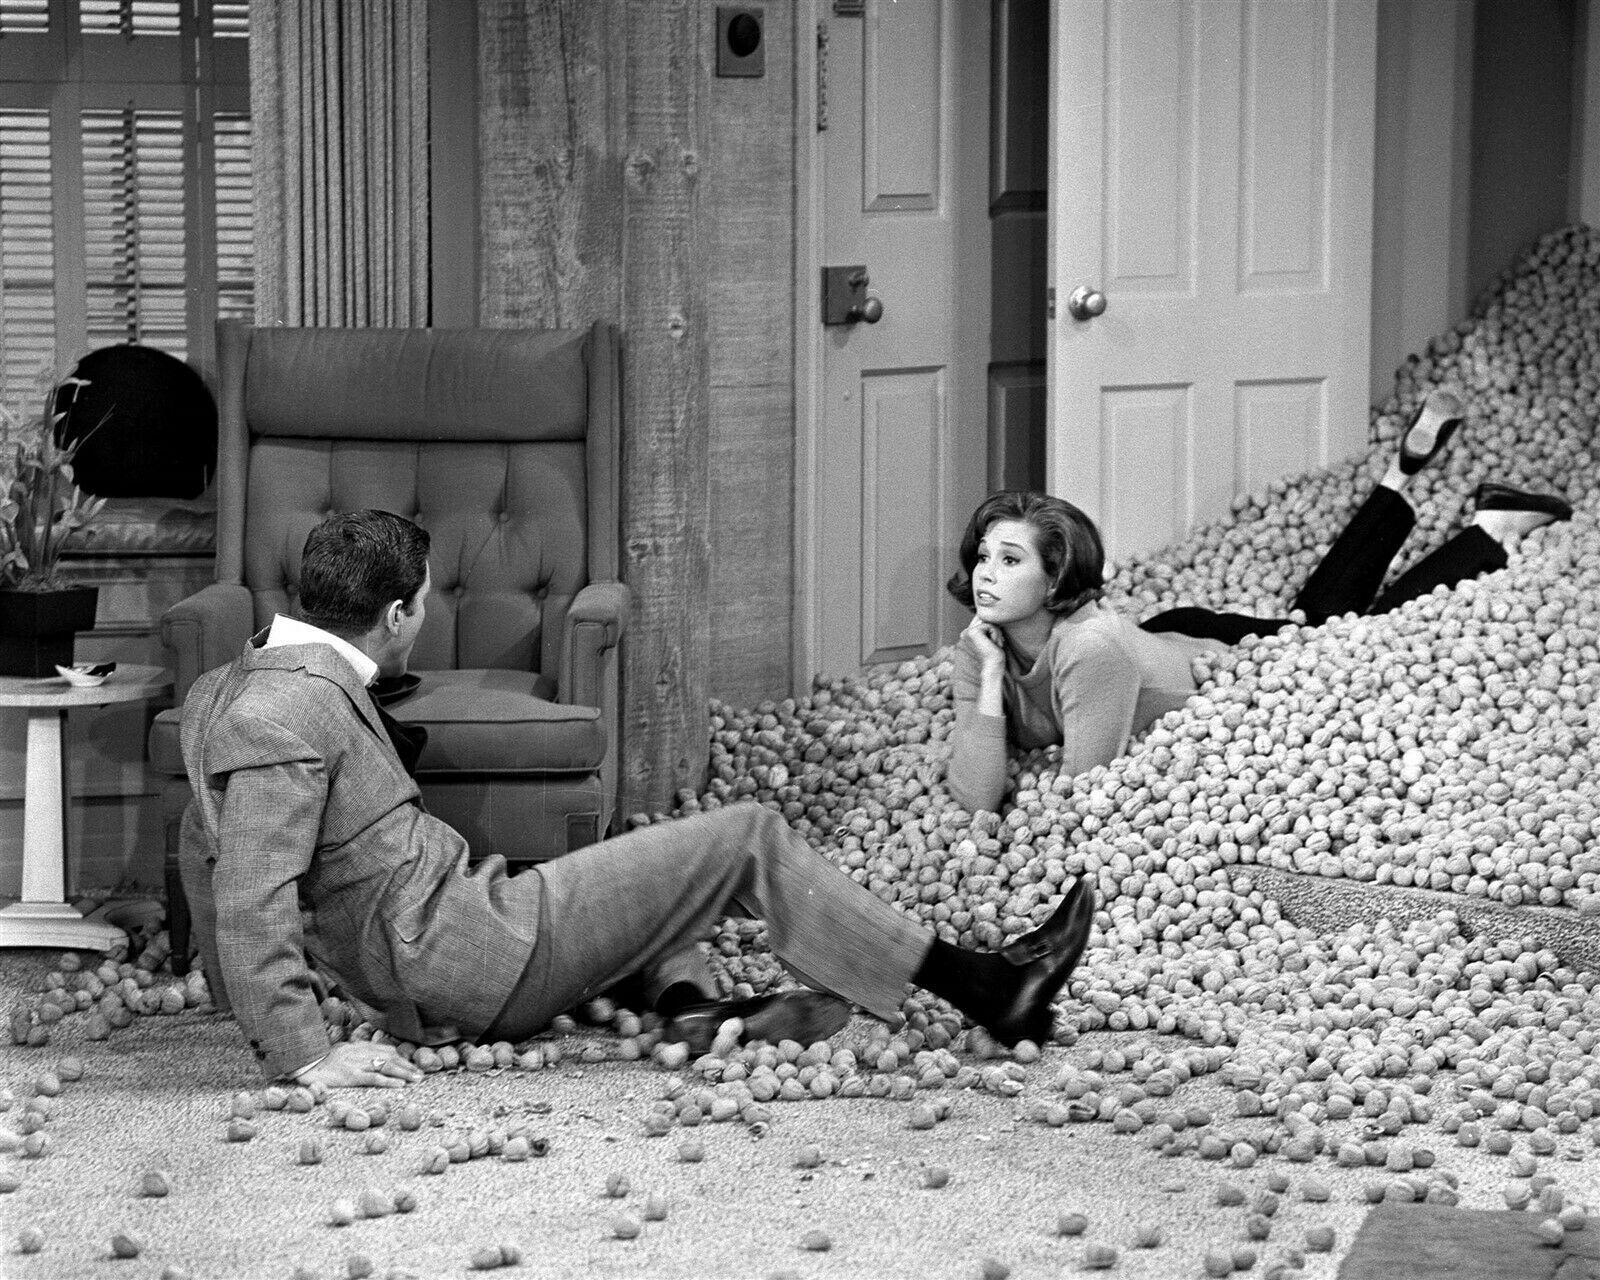 Dick Van Dyke Show 1963 Dick & Mary Tyler Moore in pile of walnuts 24x30 poster